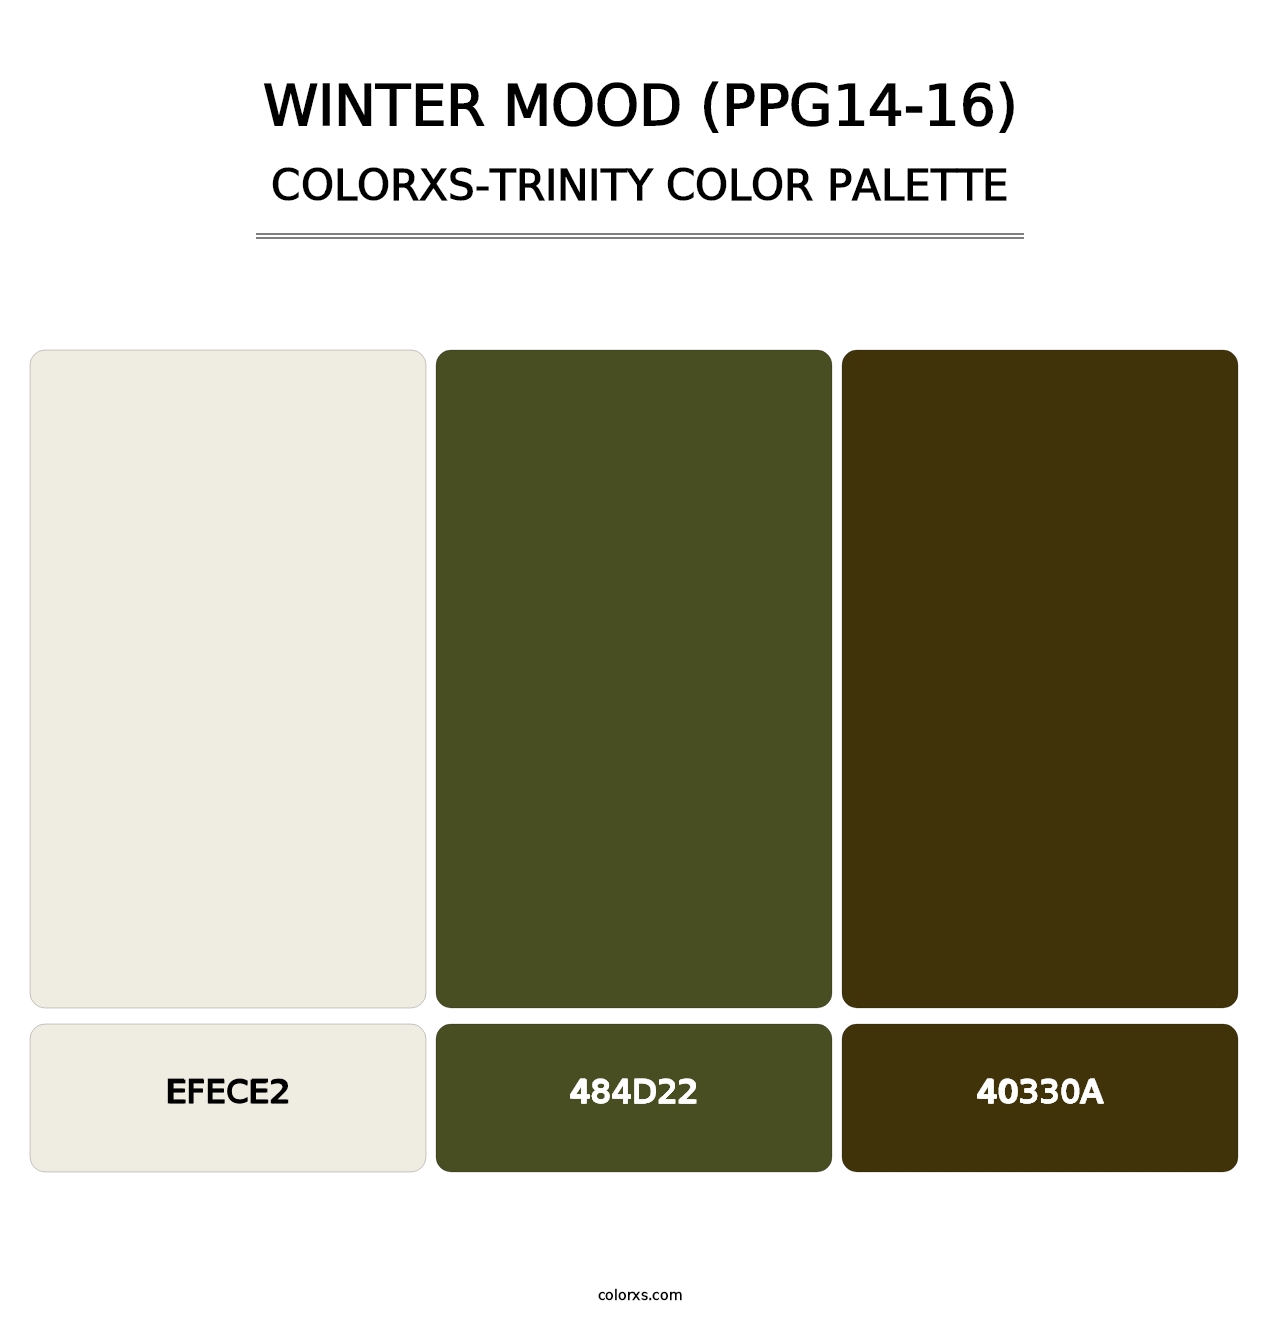 Winter Mood (PPG14-16) - Colorxs Trinity Palette